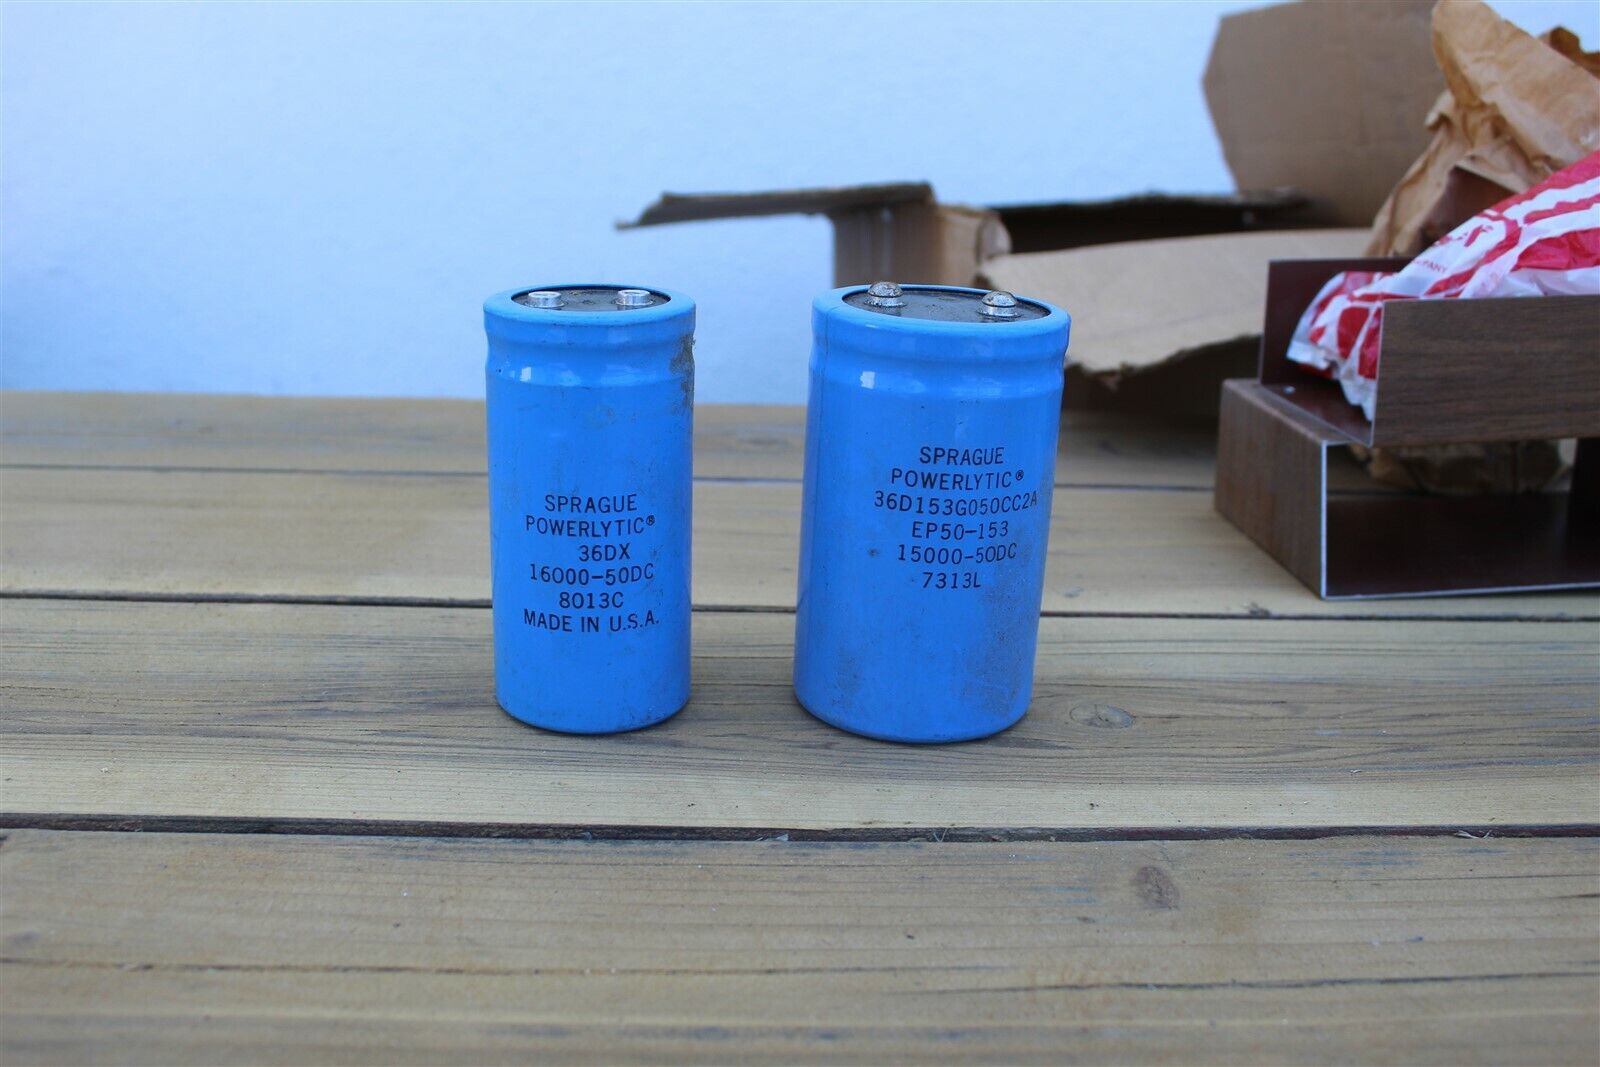 SPRAGUE POWERLYTIC CAPACITORS - 2 DIFF 36DX AND EP50-153 SEE BELOW